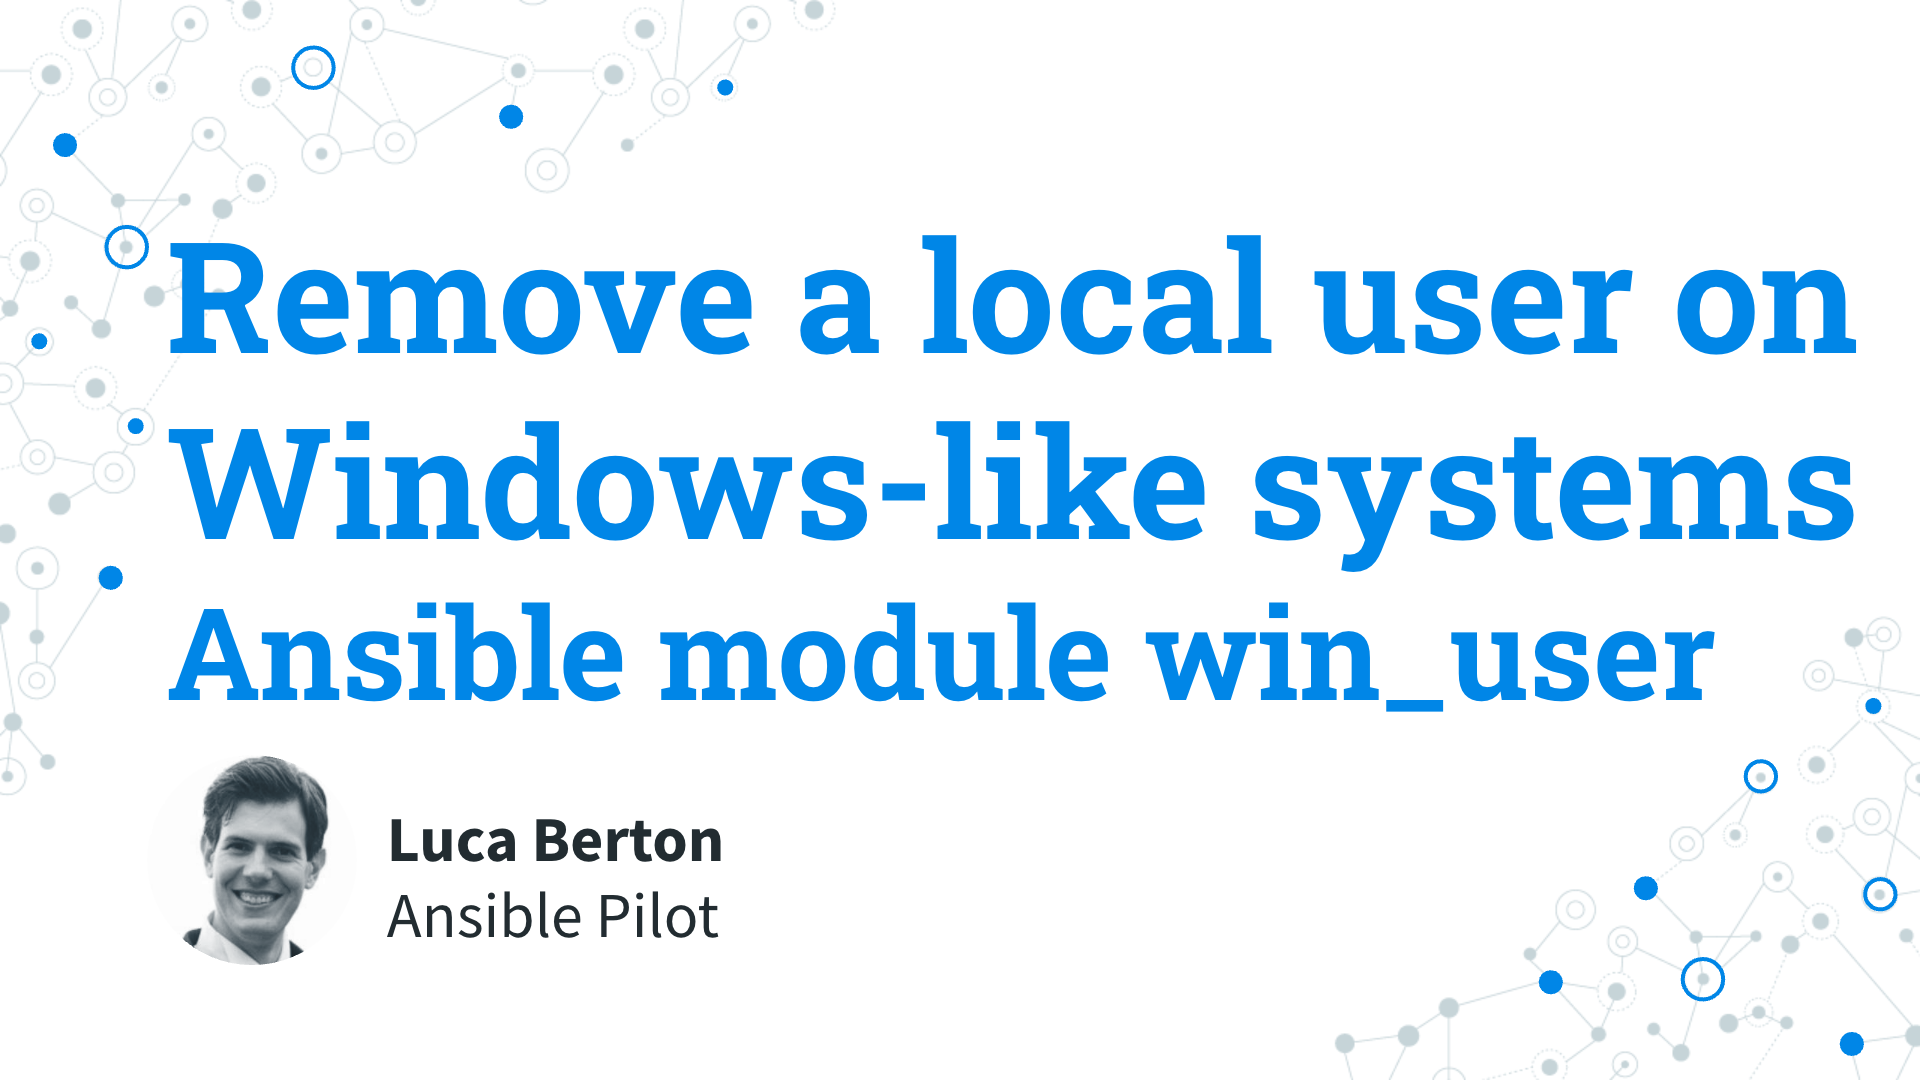 Remove a local user on Windows-like systems - Ansible module win_user